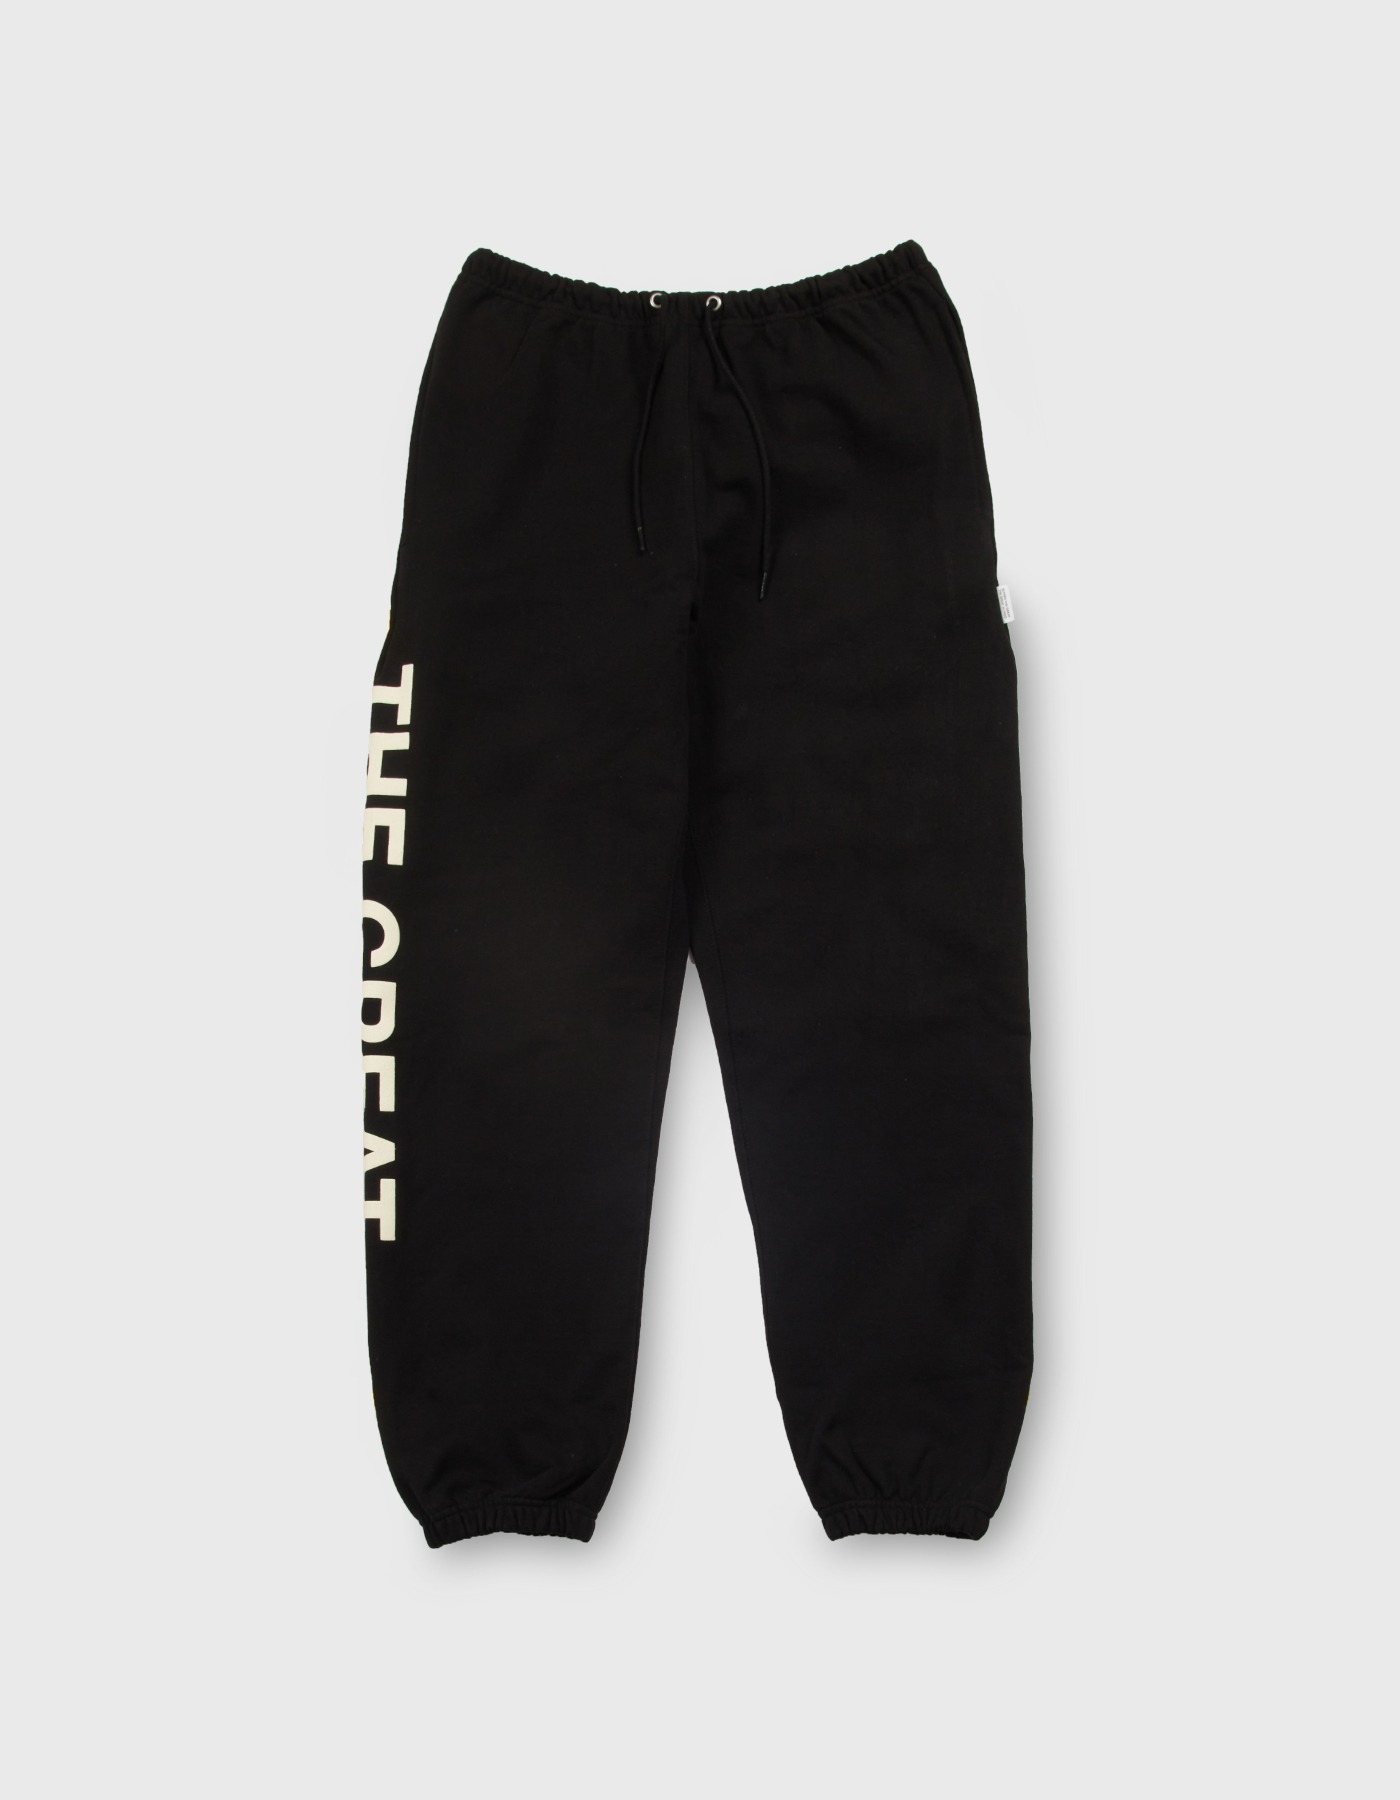 FRED THE GREAT JOGGER PANTS / Black